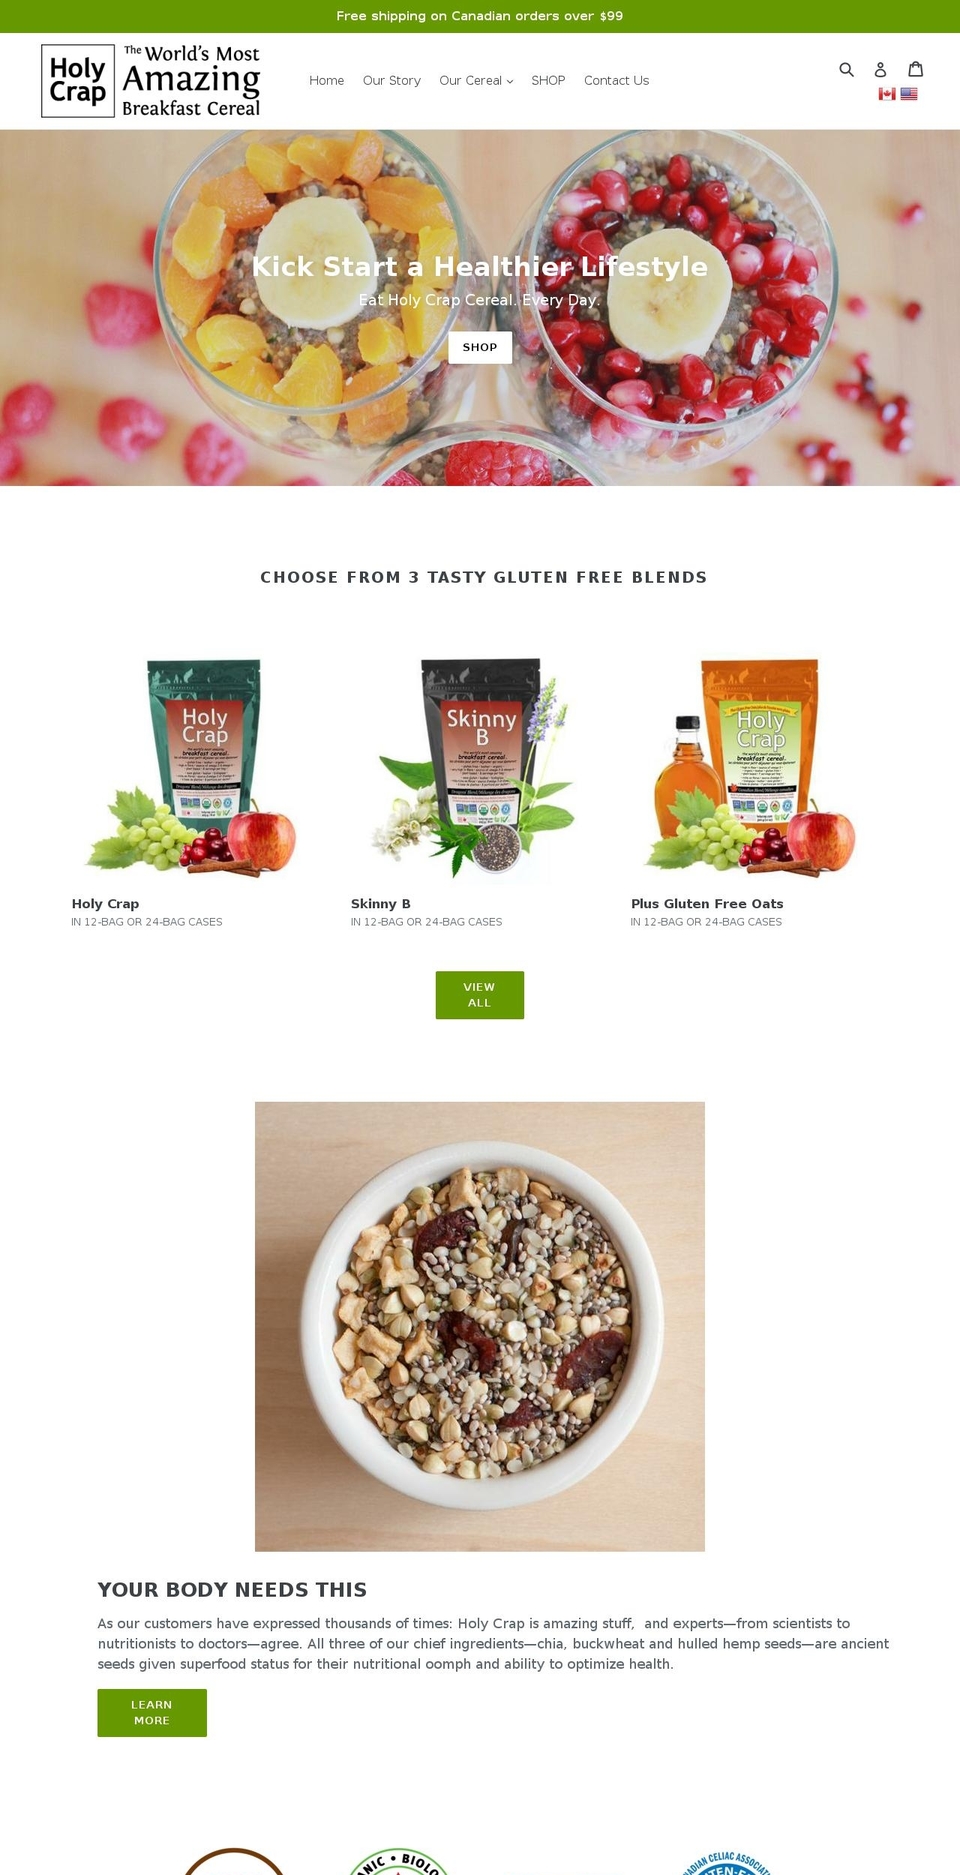 Spring Shopify theme site example holycrap.ca